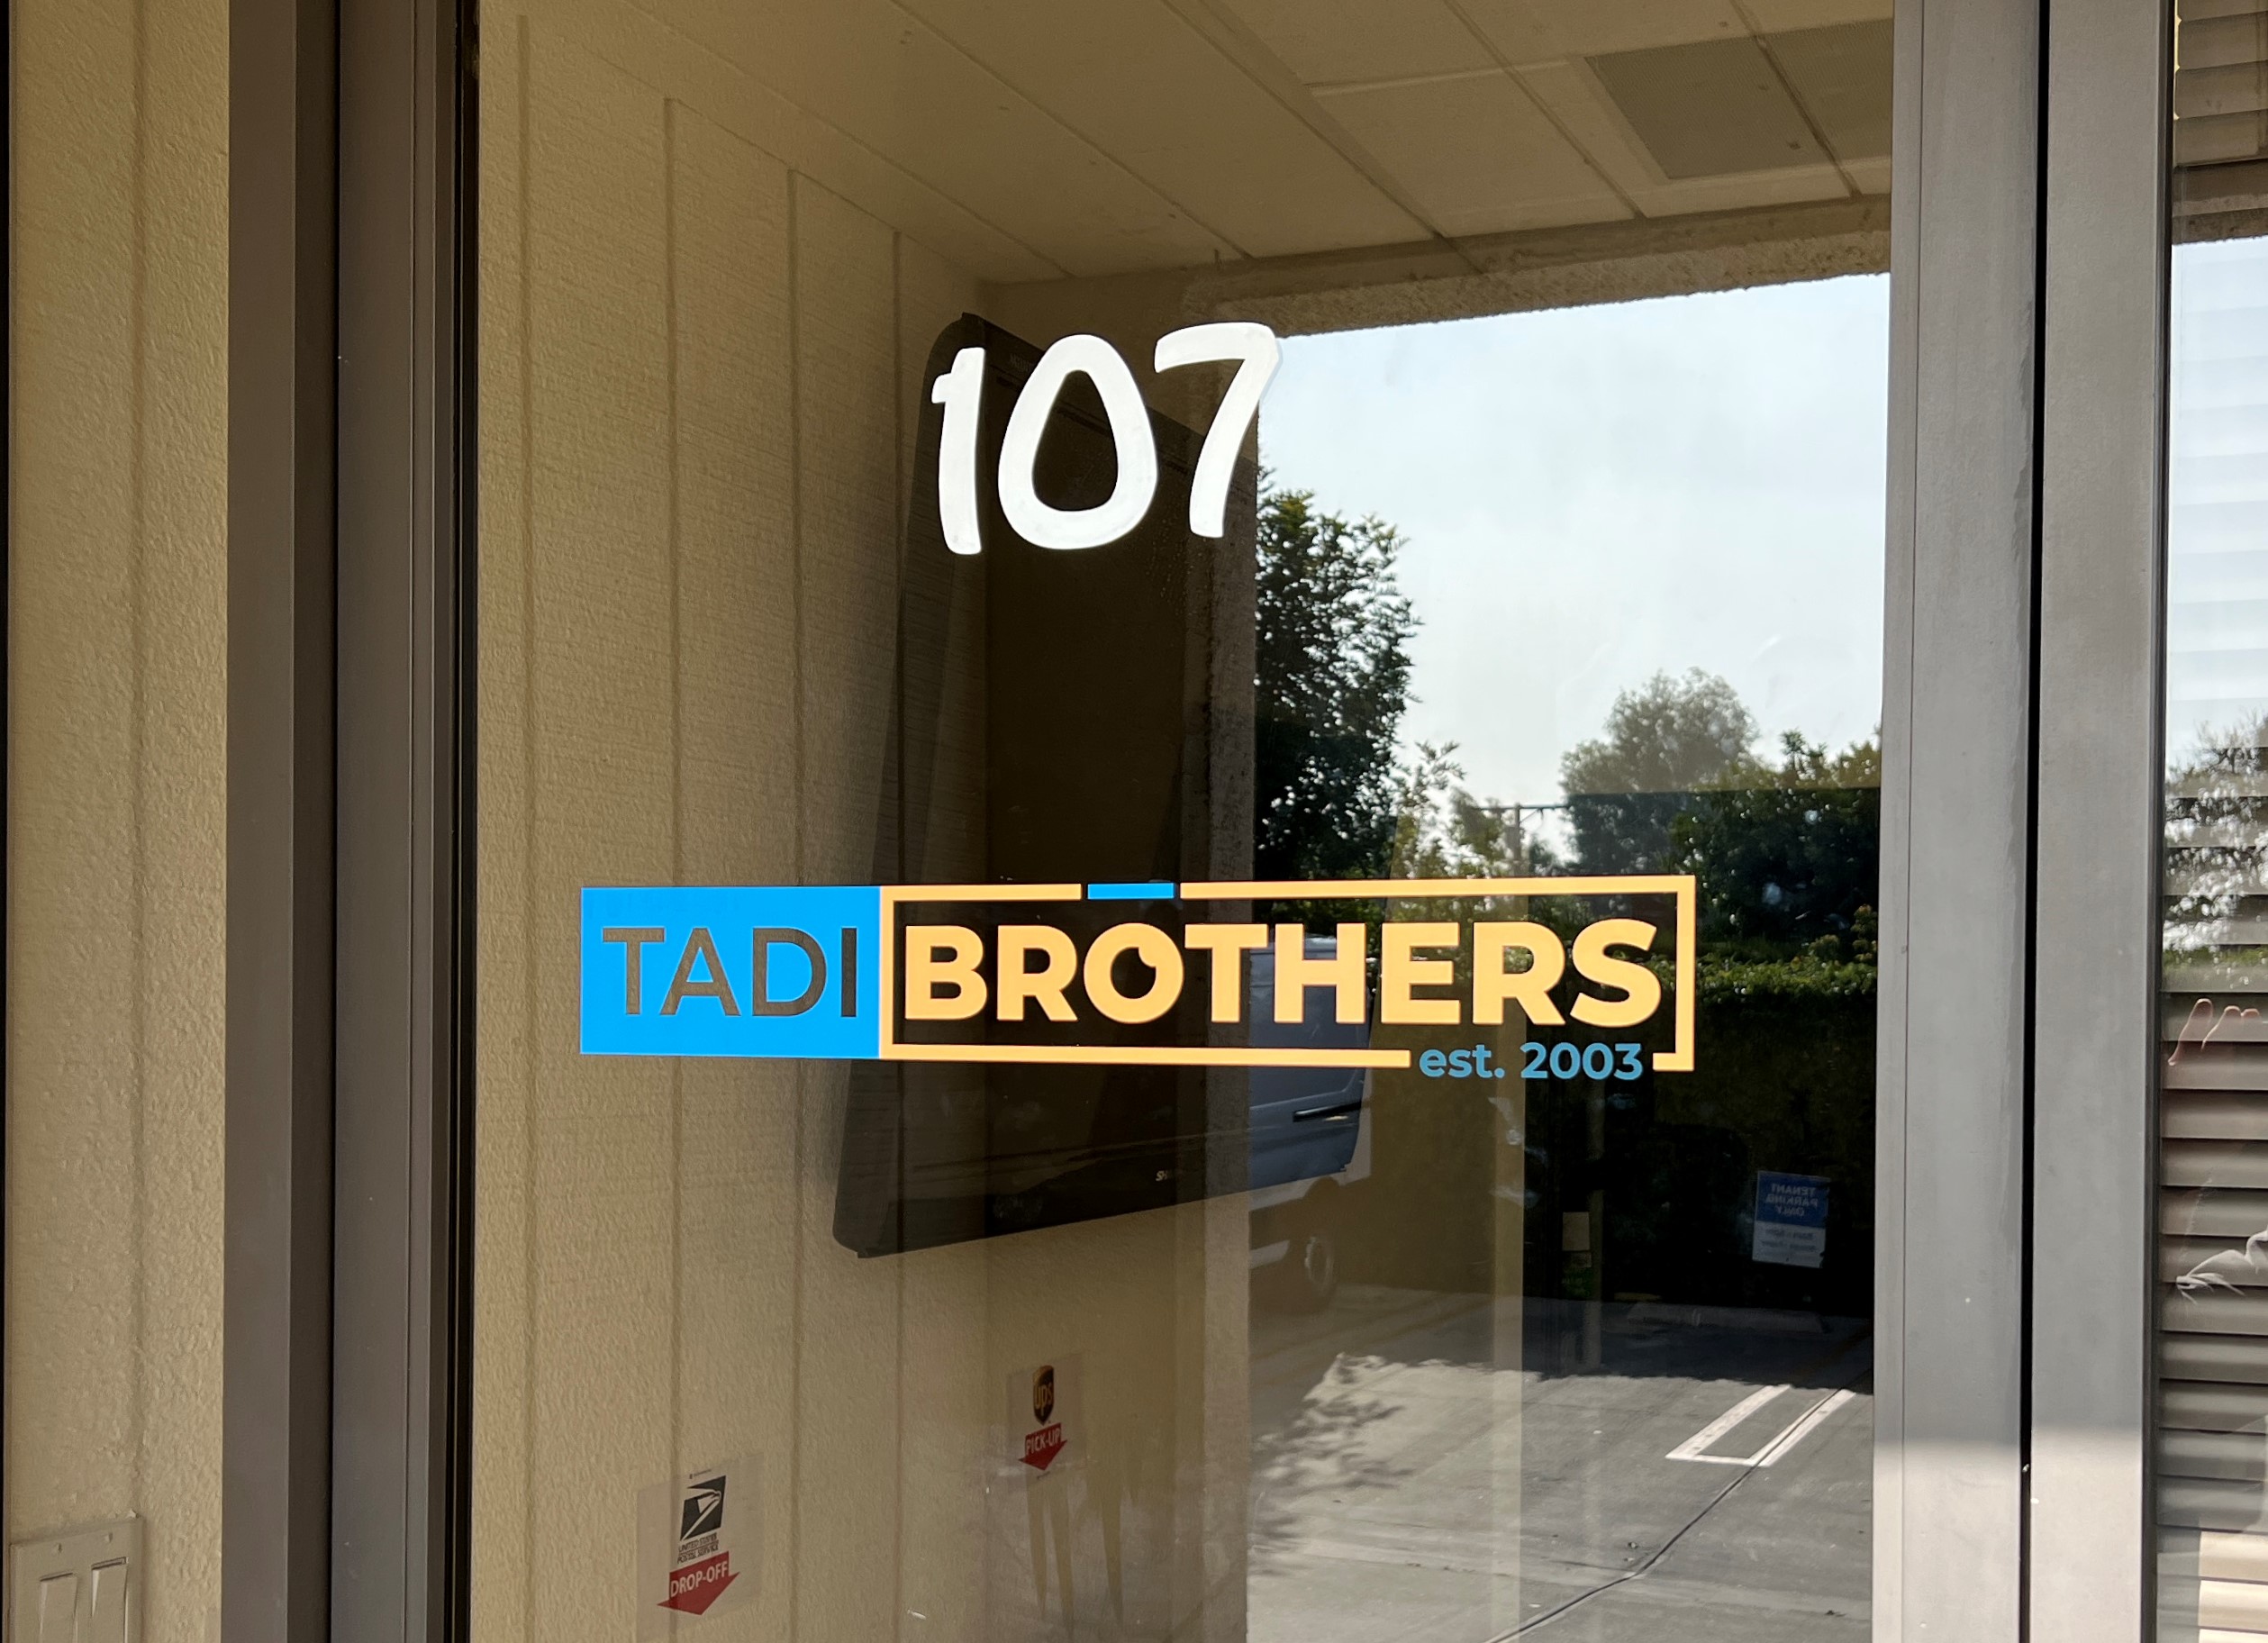 Short on space for large signage? Window graphics are the way to go. Like our entrance sign for Tadibrothers' branch in Reseda.